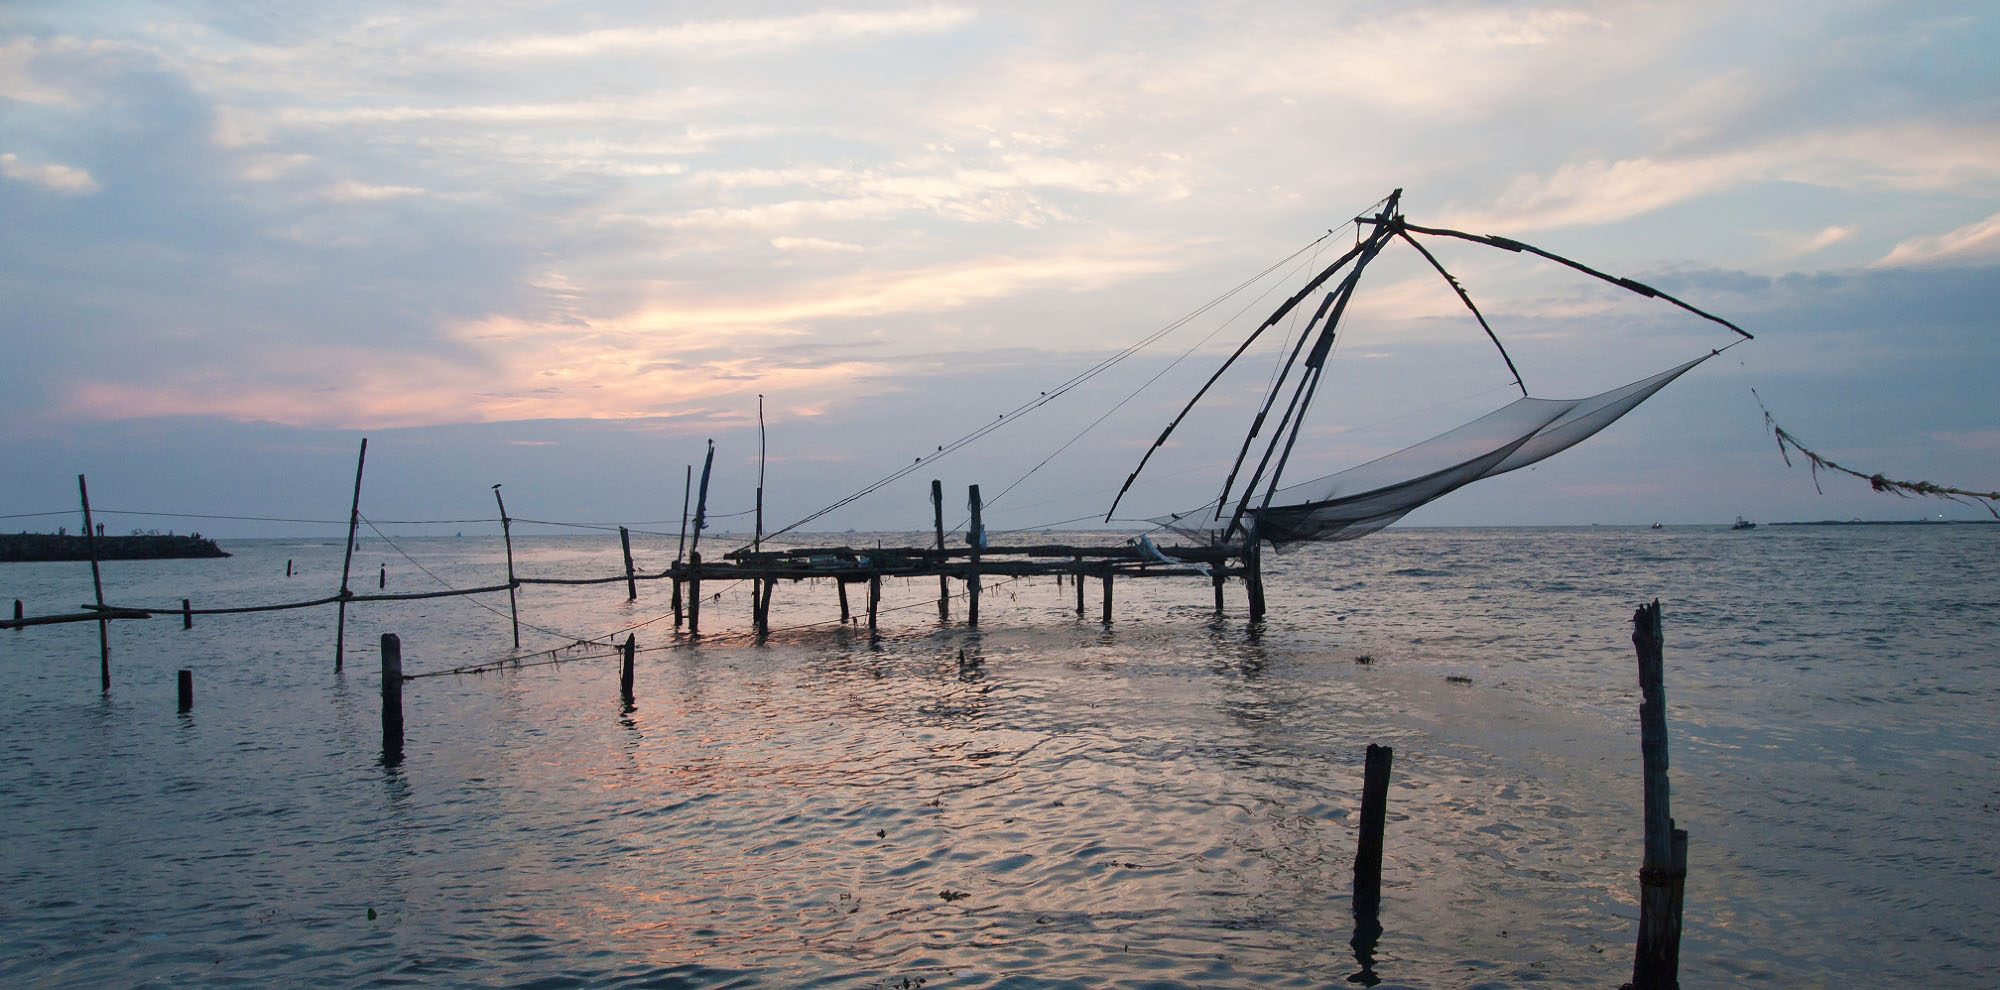 Fishing nets supported by wooden poles in the water with the sun setting in the background.